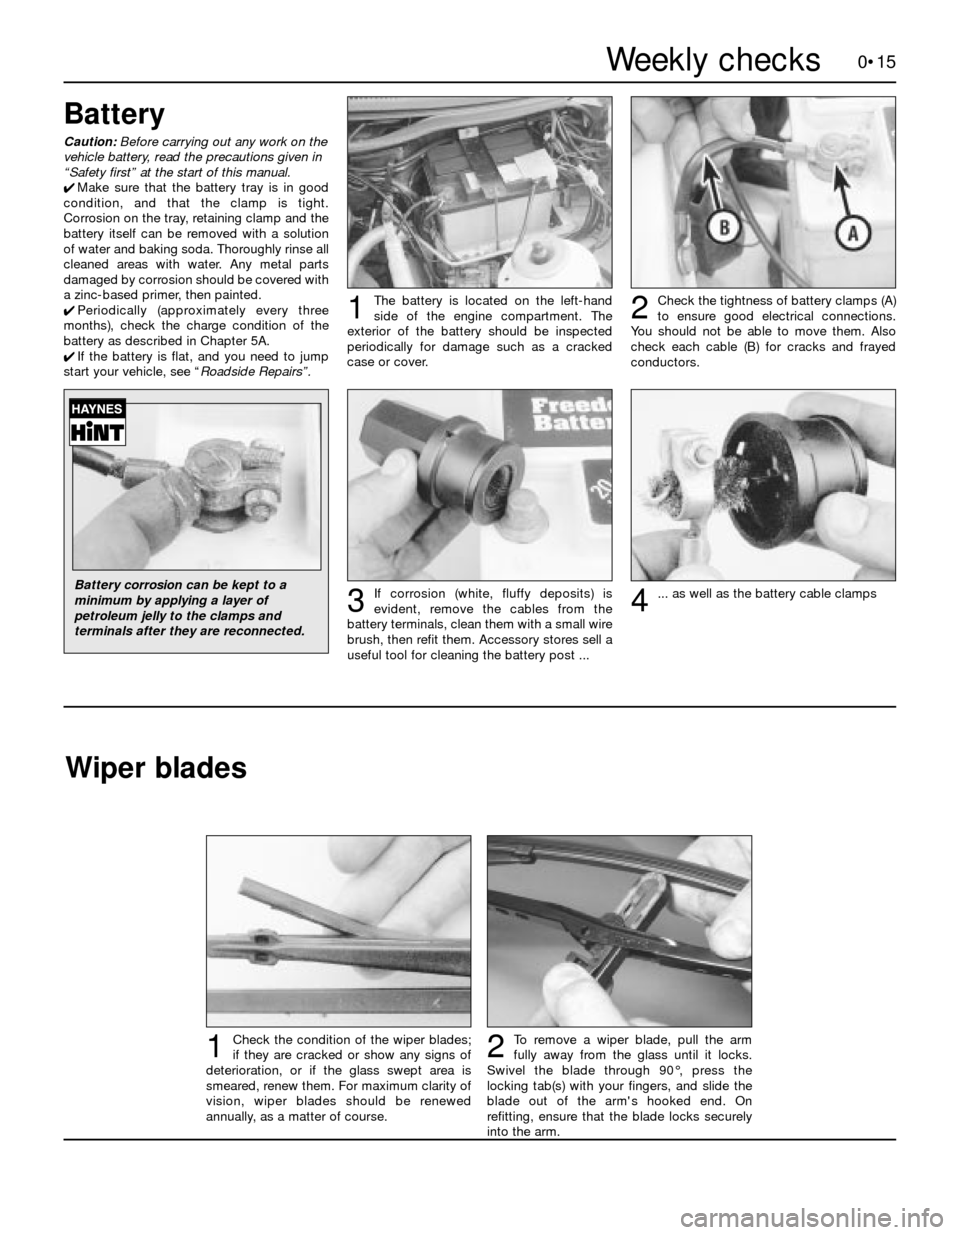 FORD SIERRA 1987 2.G Introduction Workshop Manual 0•15
To remove a wiper blade, pull the arm
fully away from the glass until it locks.
Swivel the blade through 90°, press the
locking tab(s) with your fingers, and slide the
blade out of the arms h